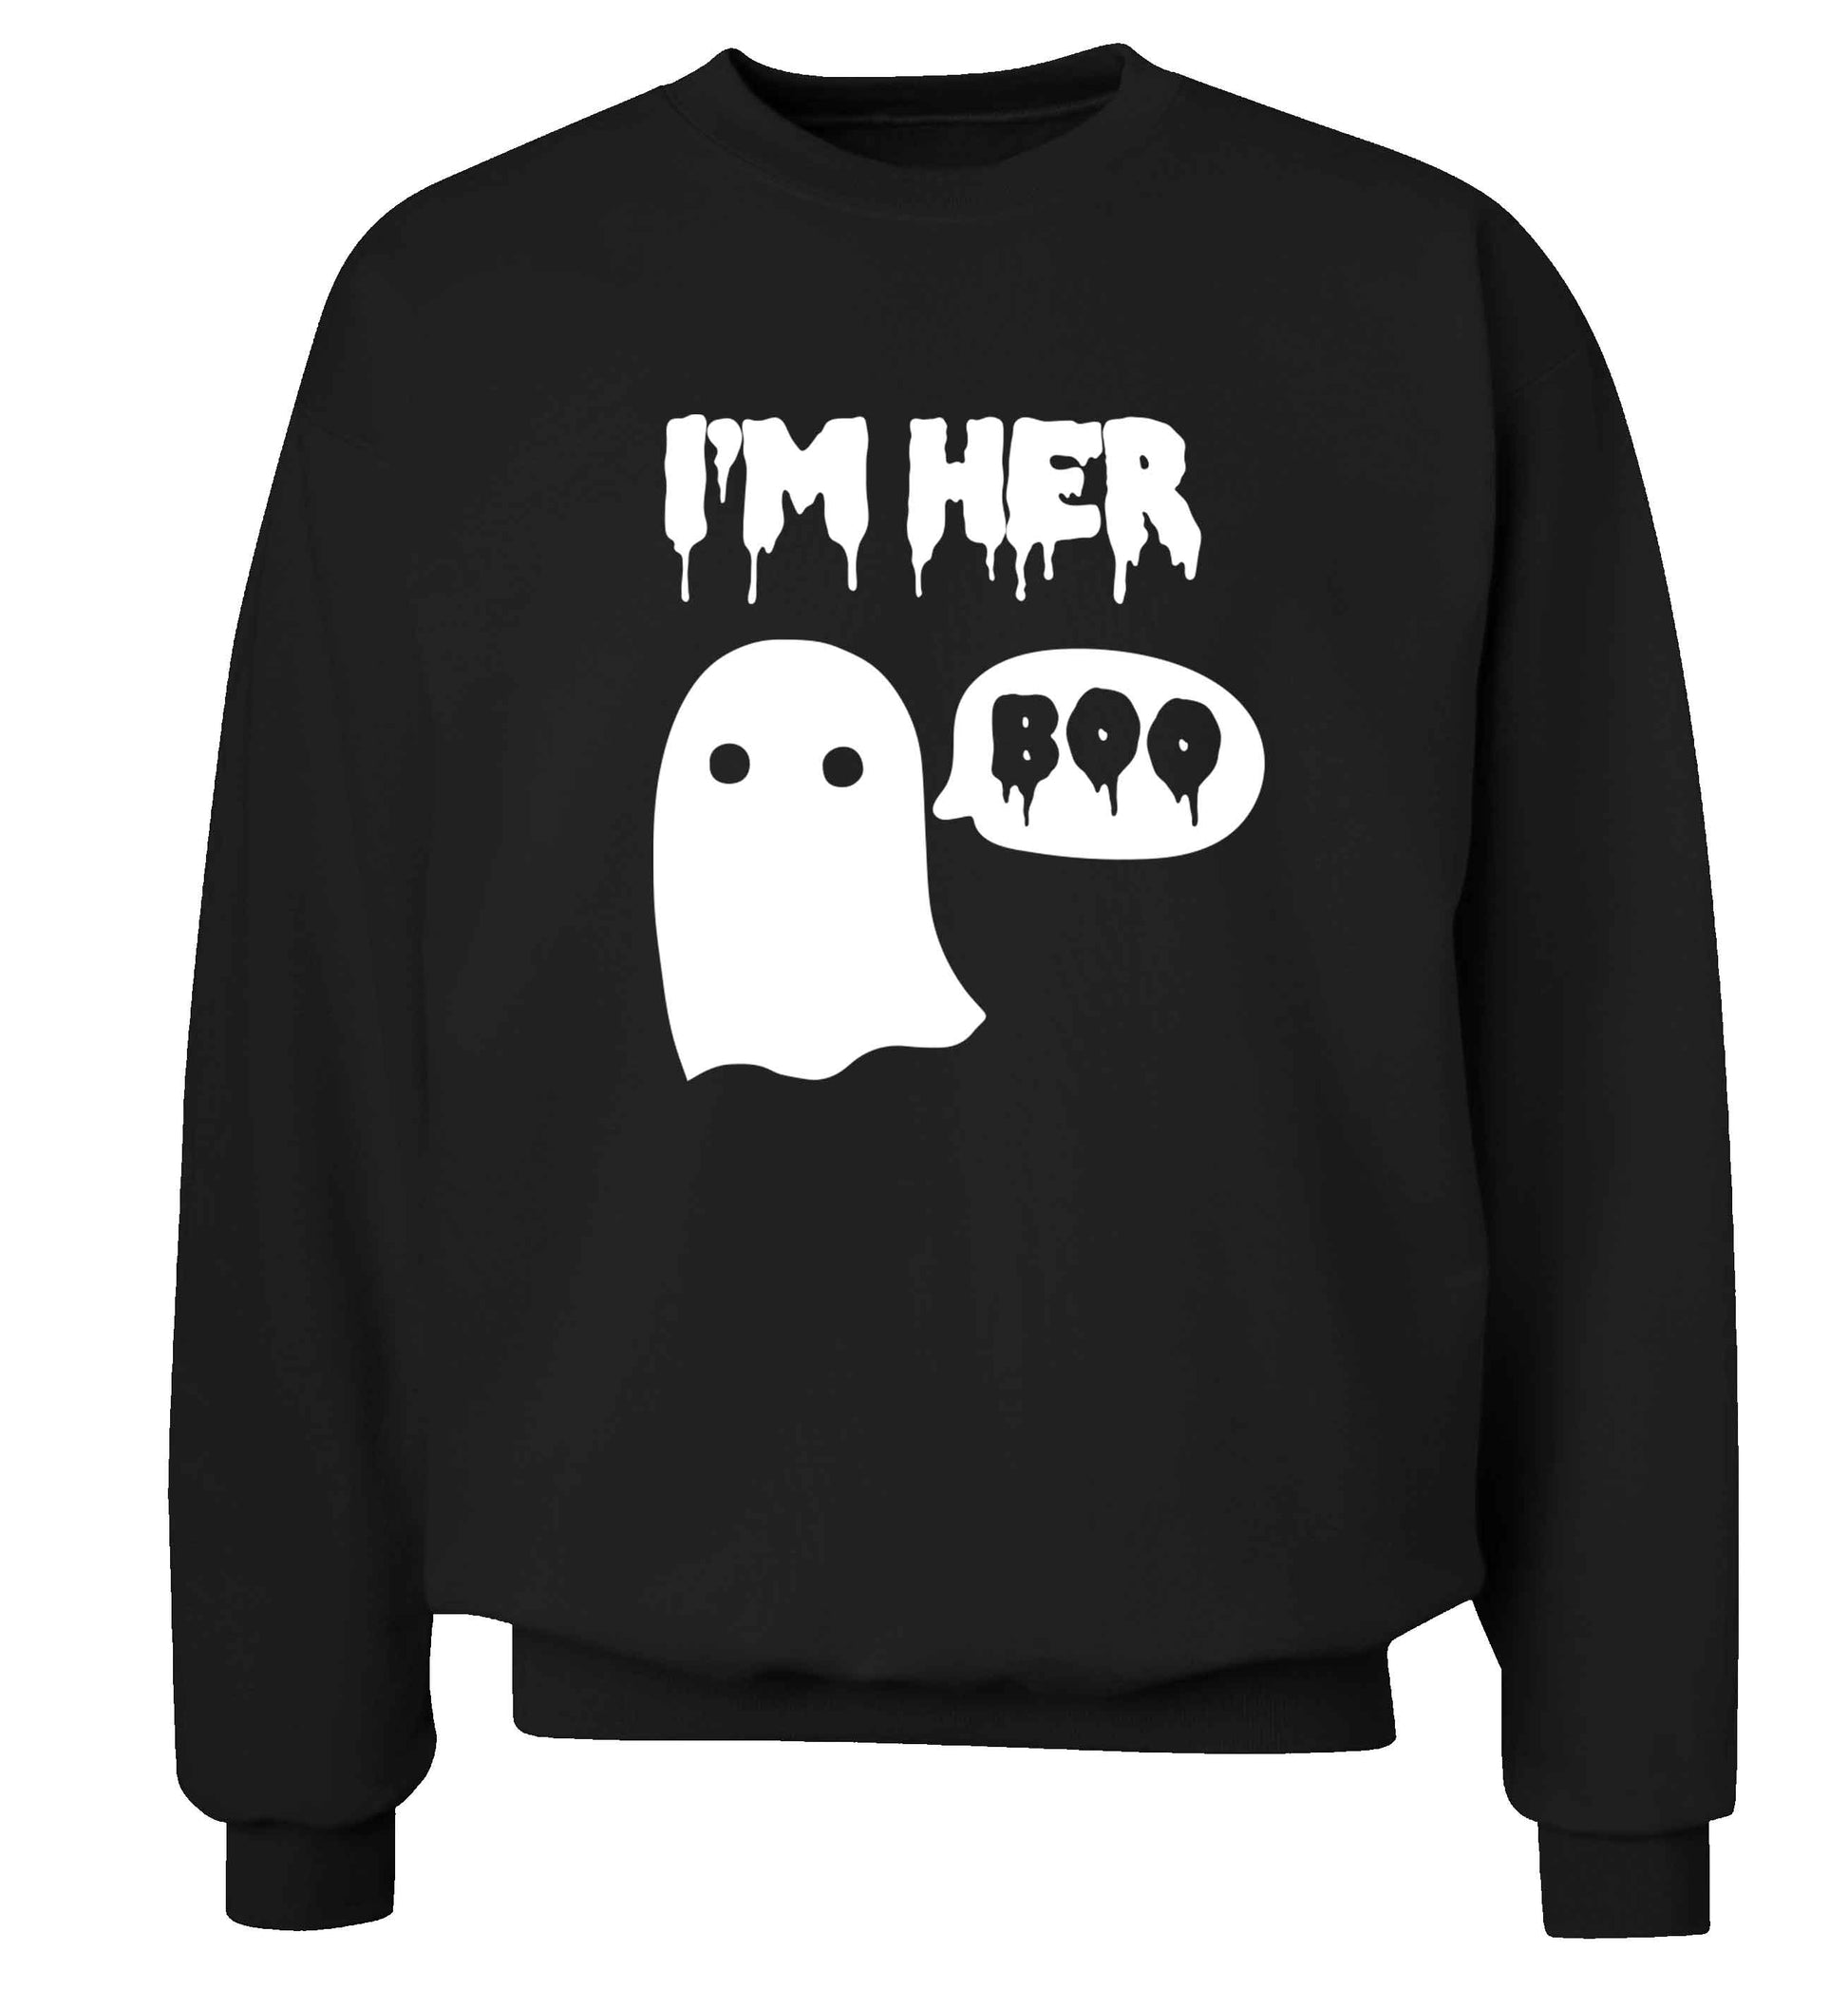 I'm her boo adult's unisex black sweater 2XL